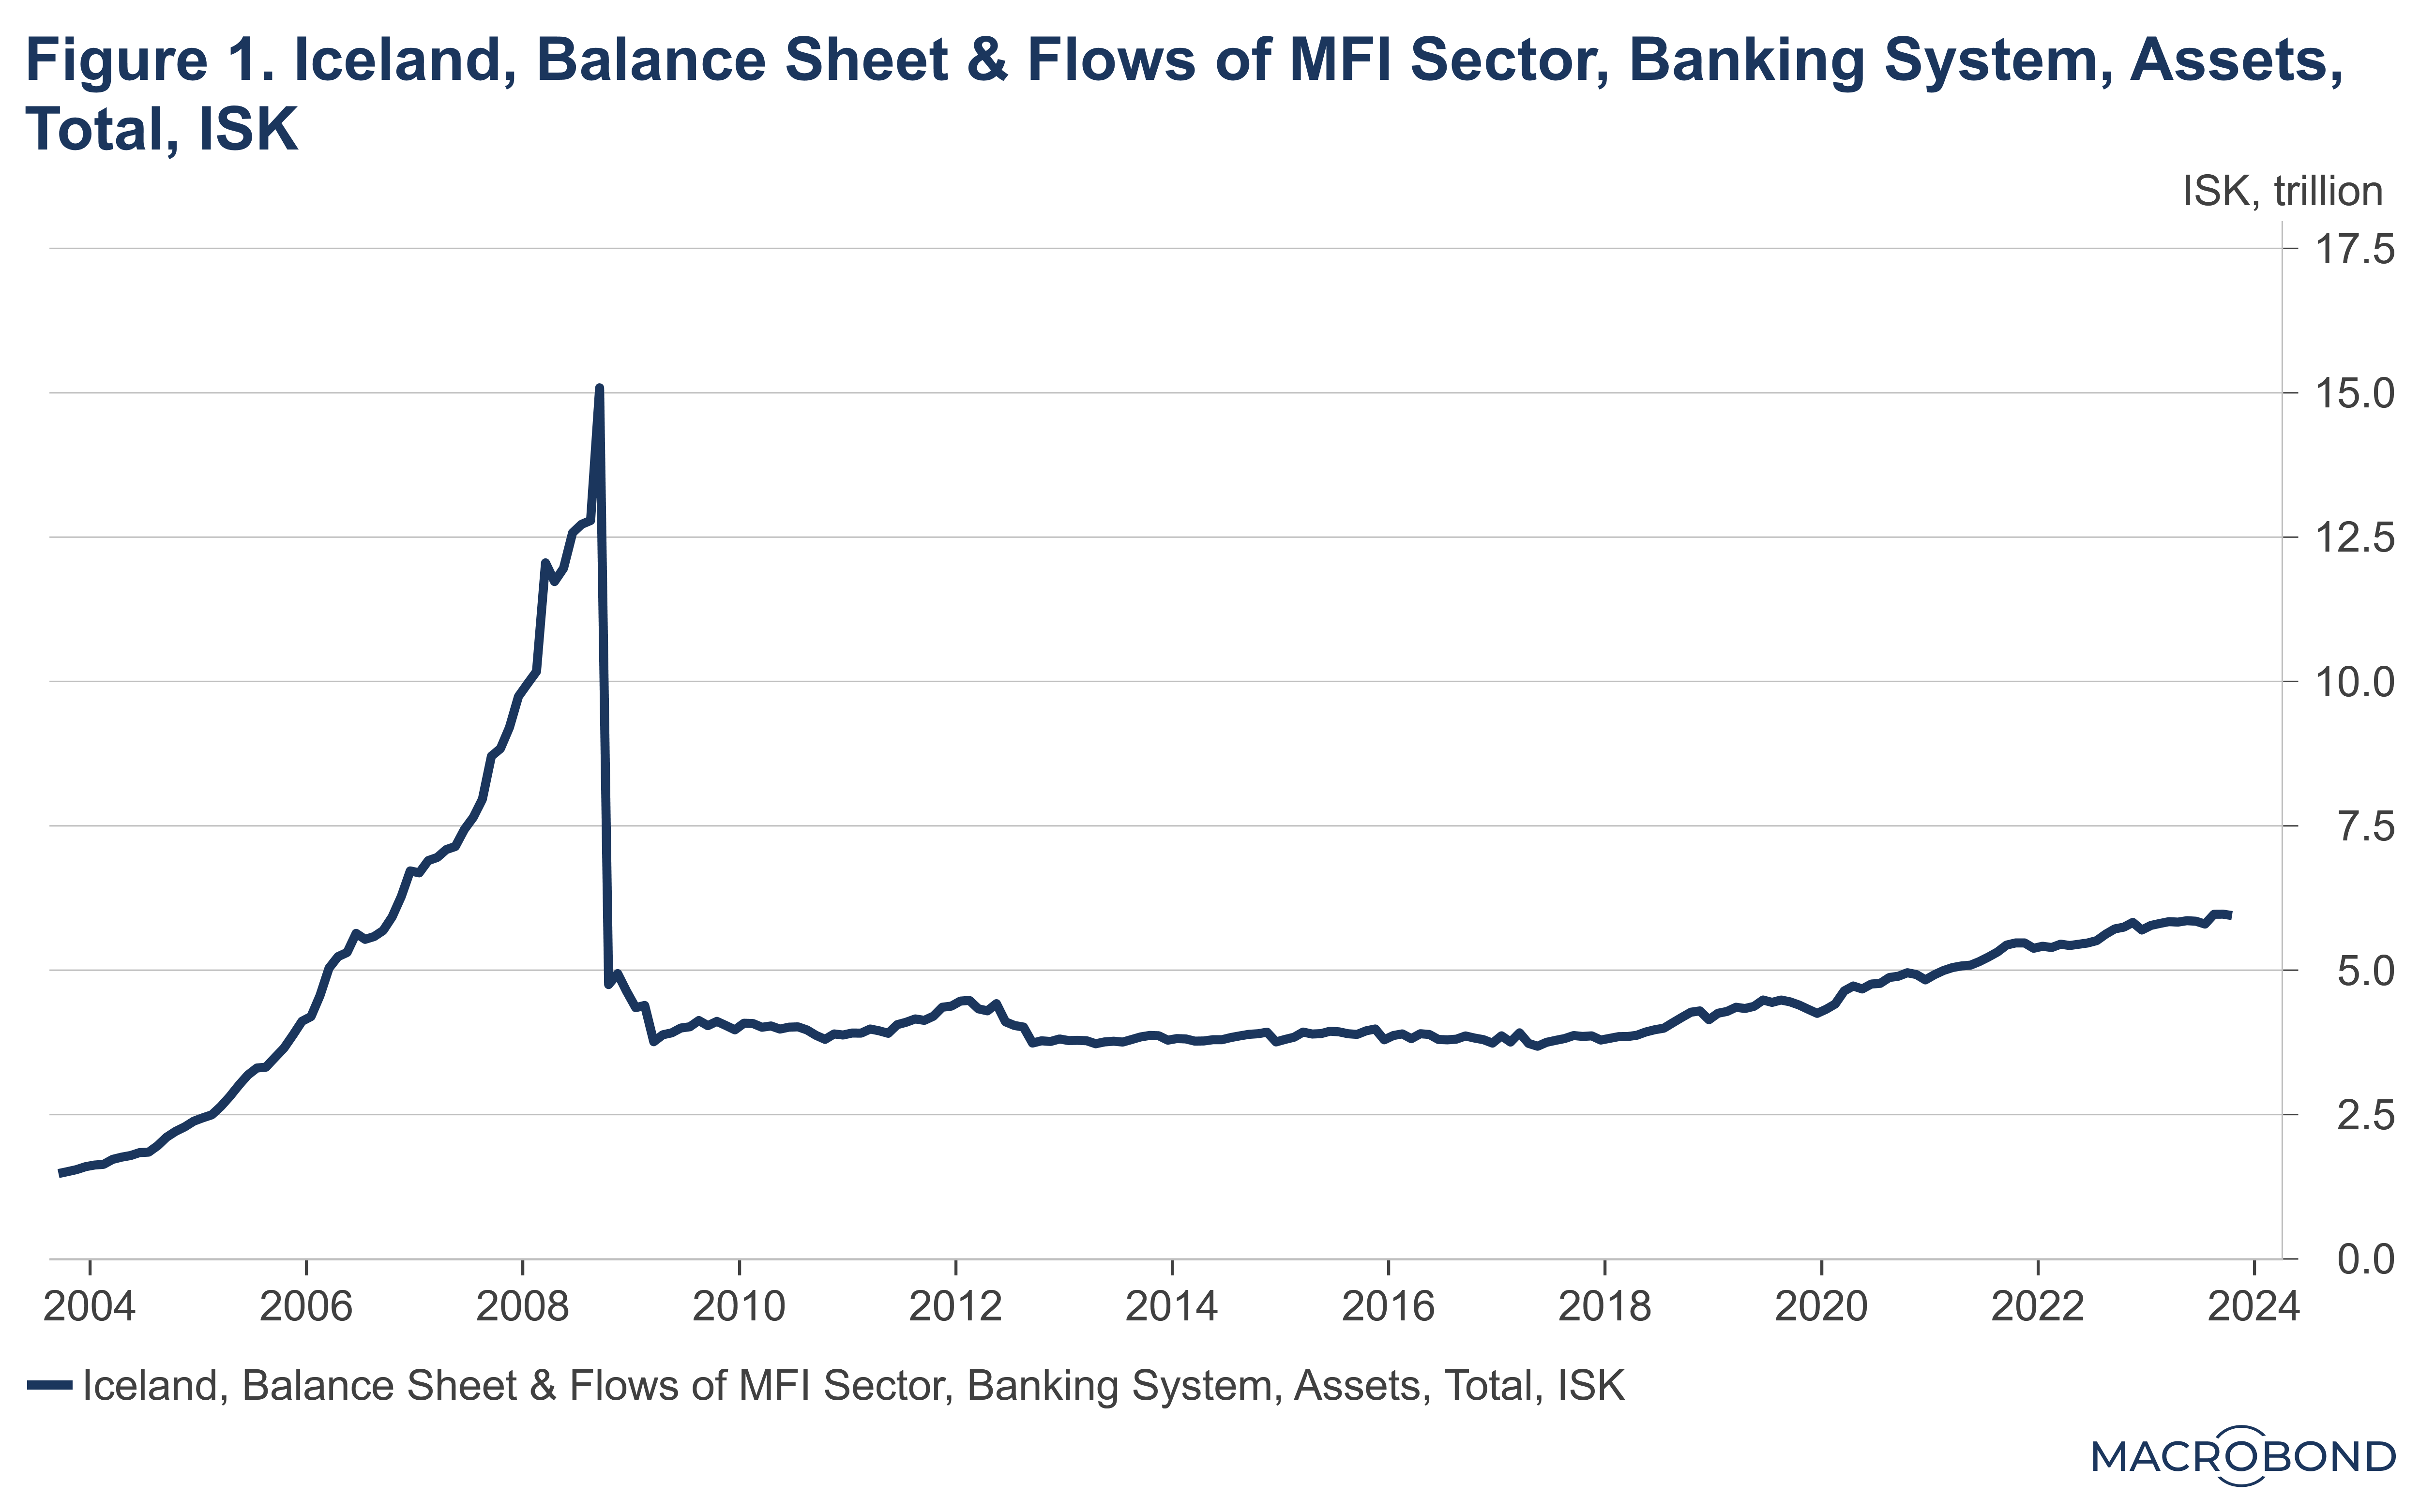 Chart showing how Icelandic bank assets skyrocketed in the 2000s before crashing in 2008. 